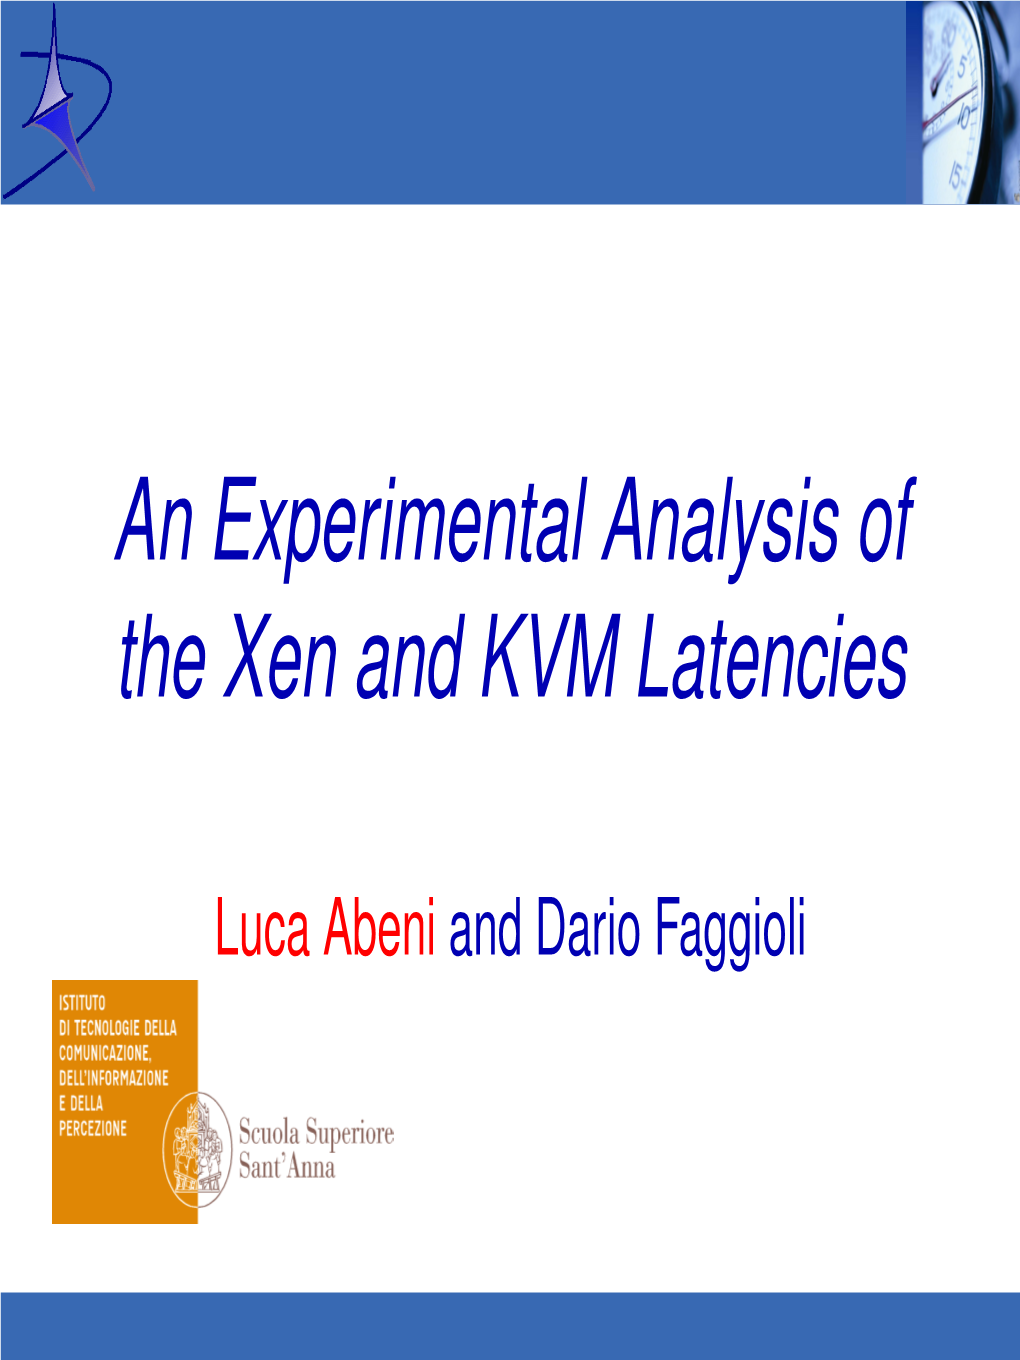 An Experimental Analysis of the Xen and KVM Latencies